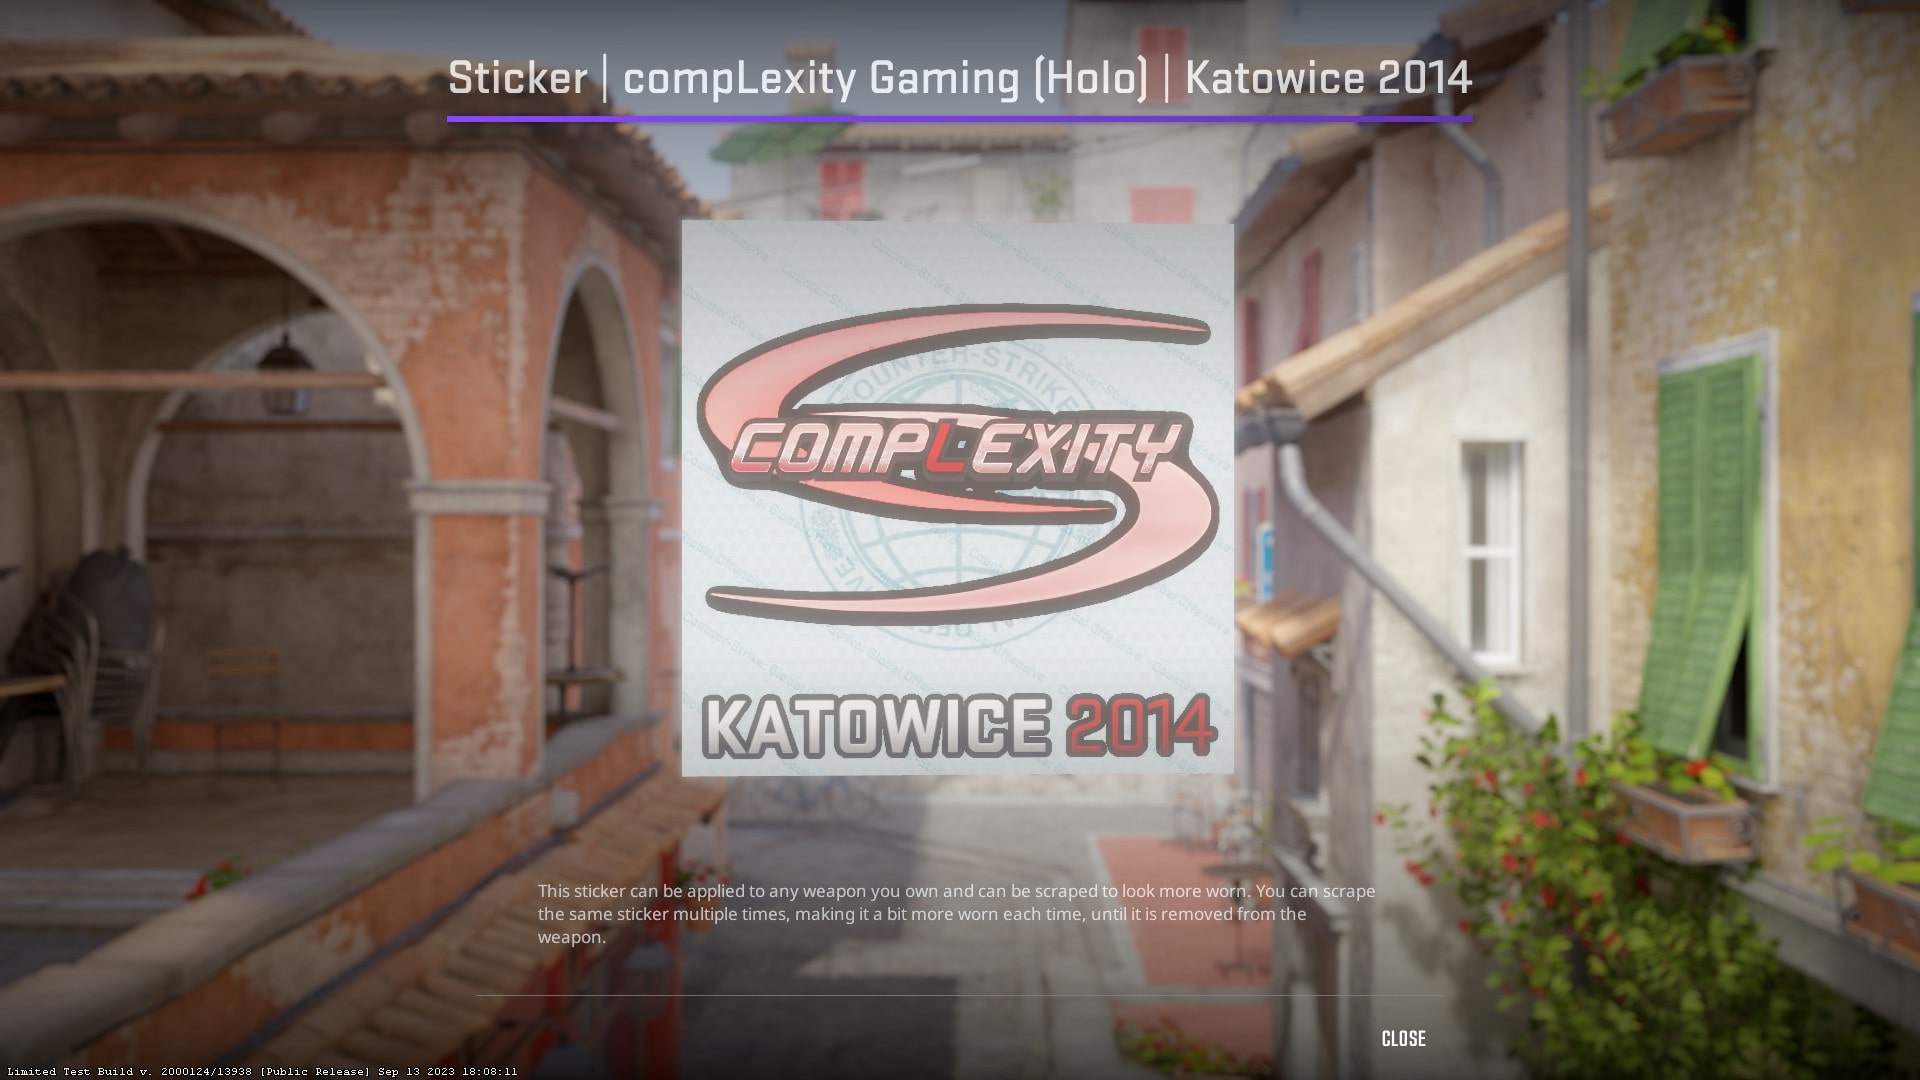 Sticker compLexity Gaming (Holo) Katowice 2014 Current Price